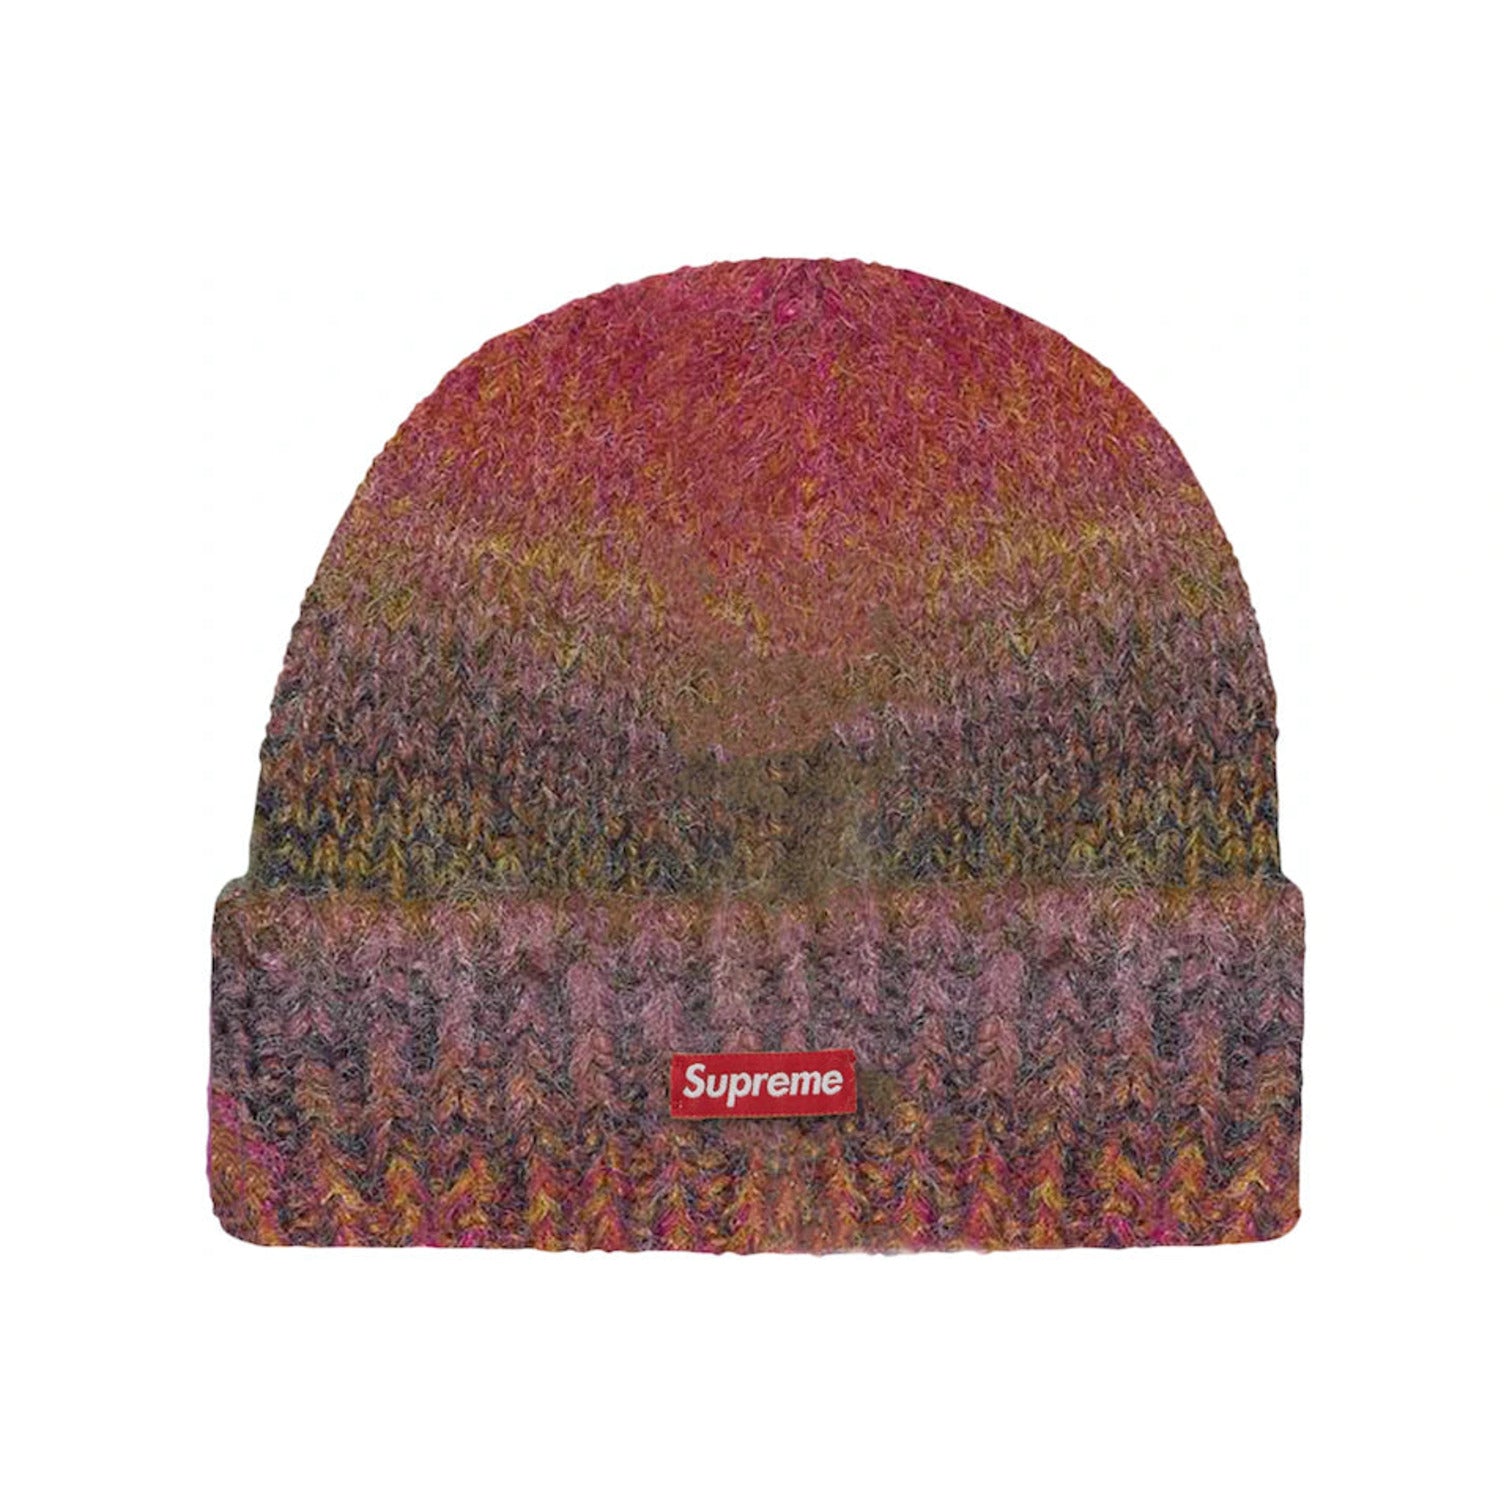 Supreme Gradient Stripe Beanie Sold At YEG Exotic Today! – YEG EXOTIC